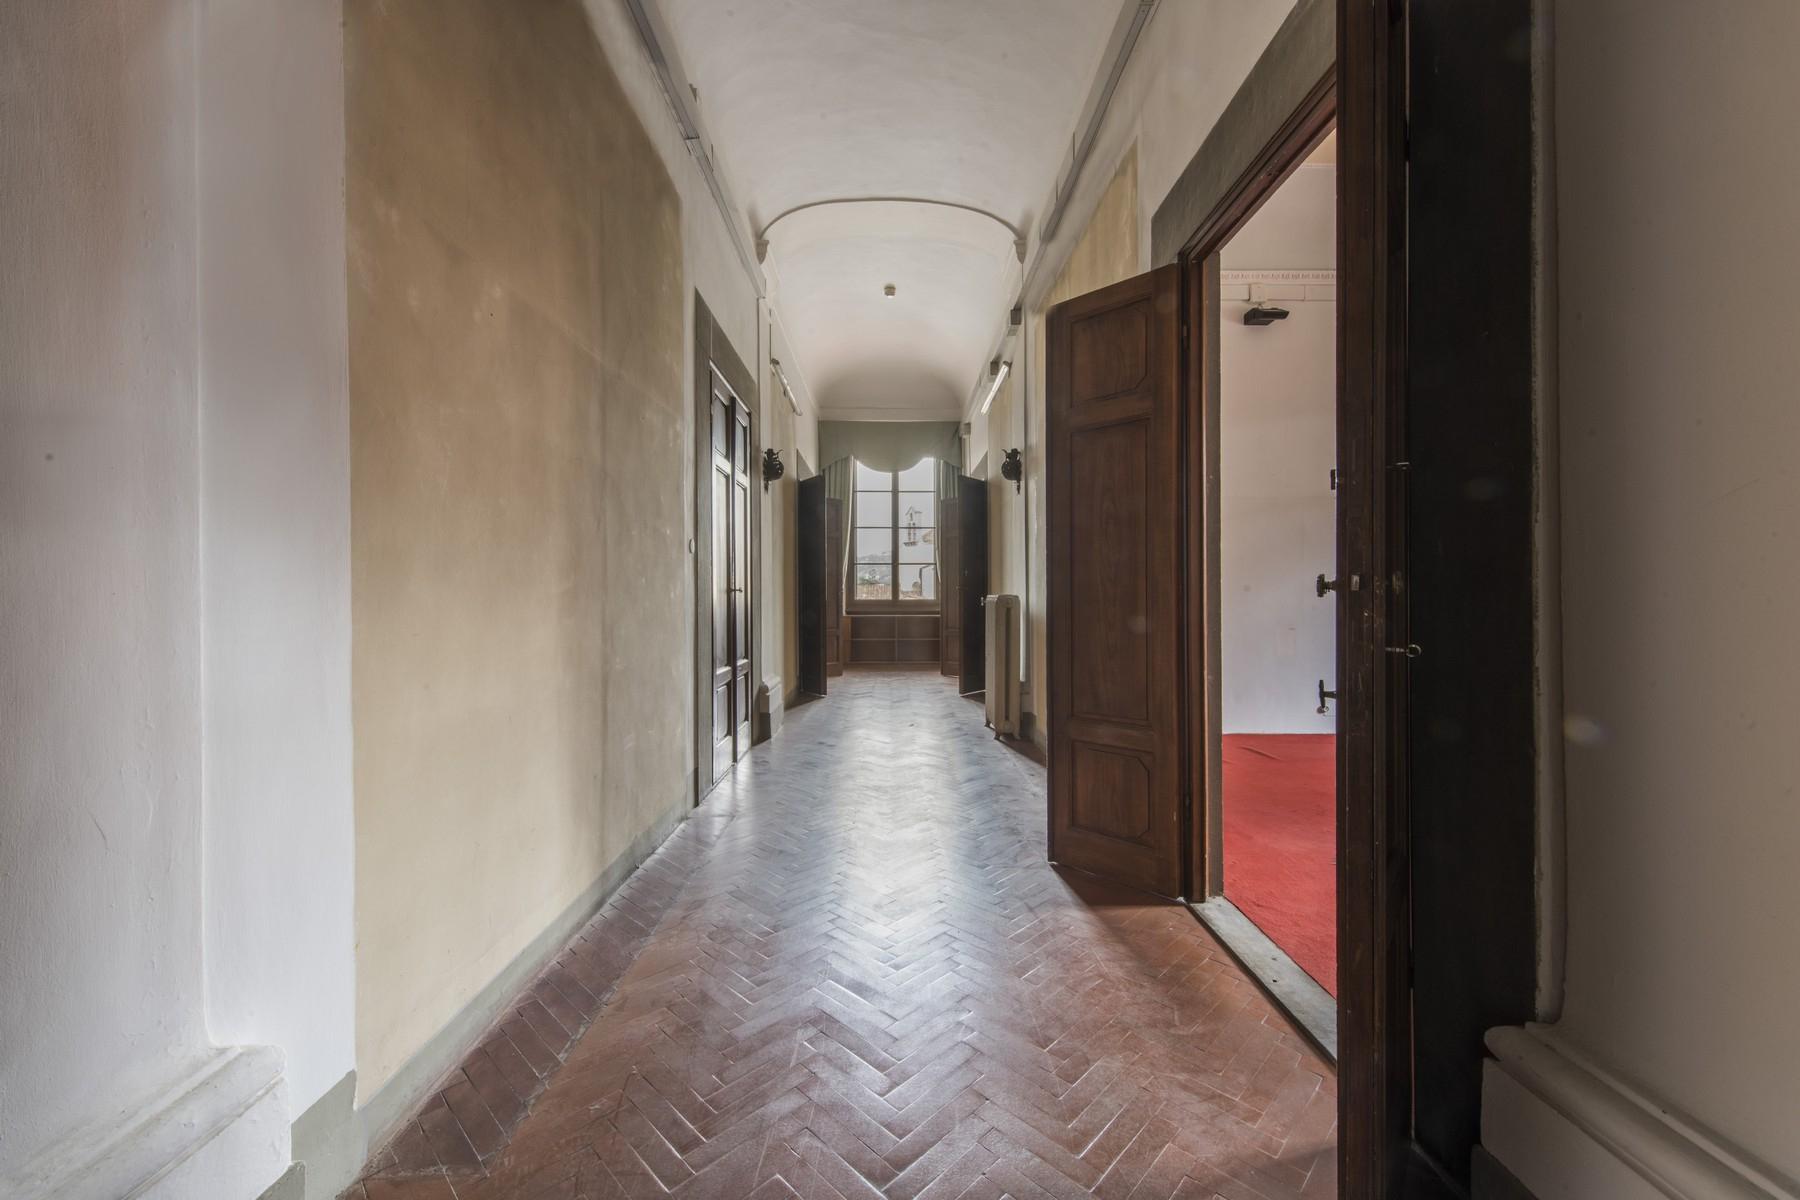 Magnificent 520sqm penthouse in a historic Florentine palazzo. - 18